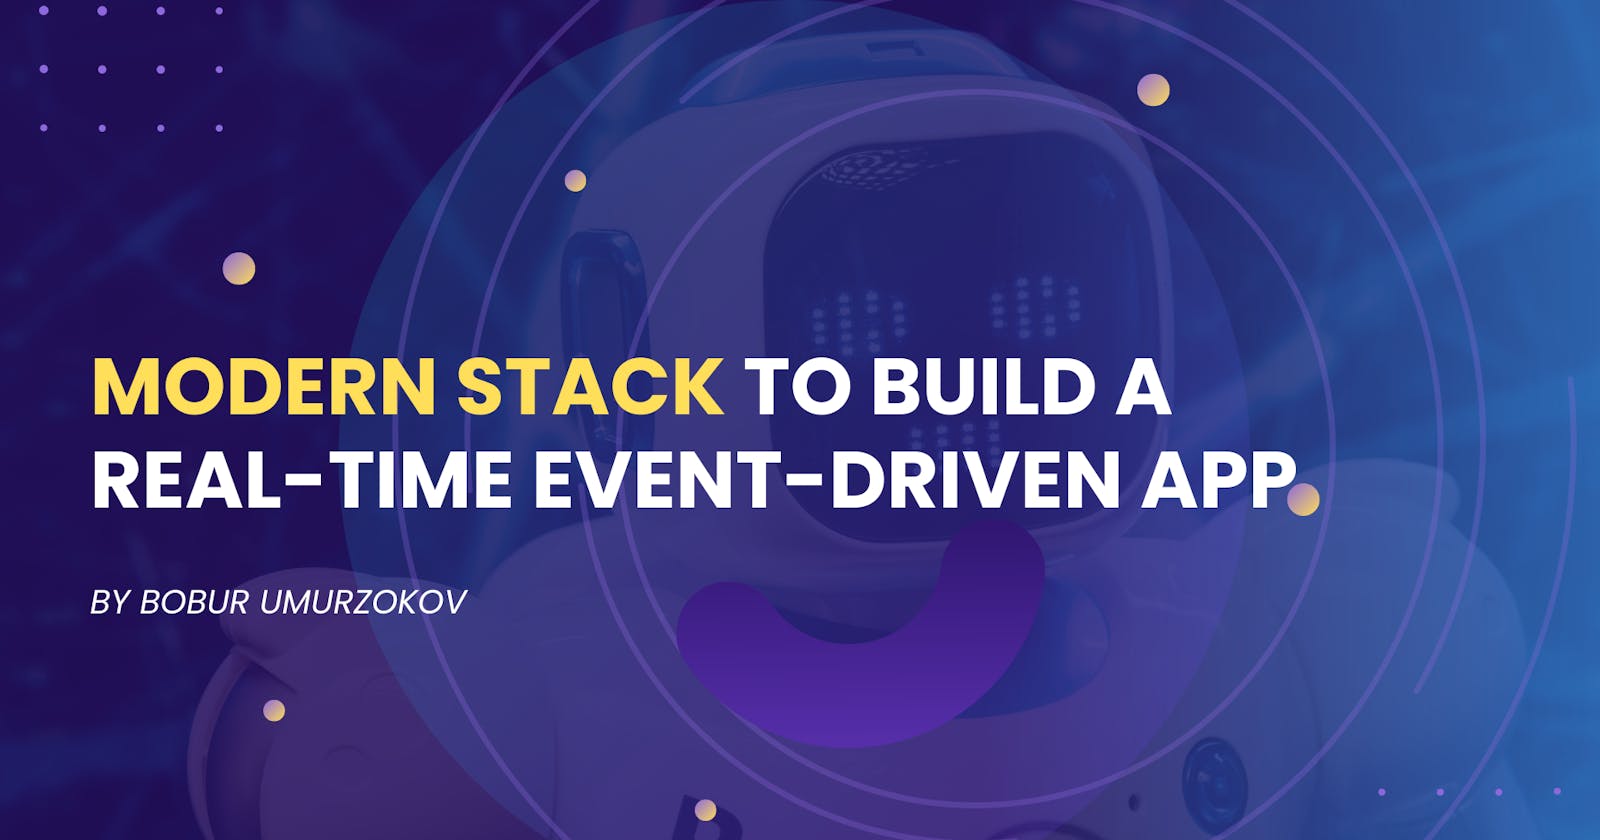 Modern stack to build a real-time event-driven app